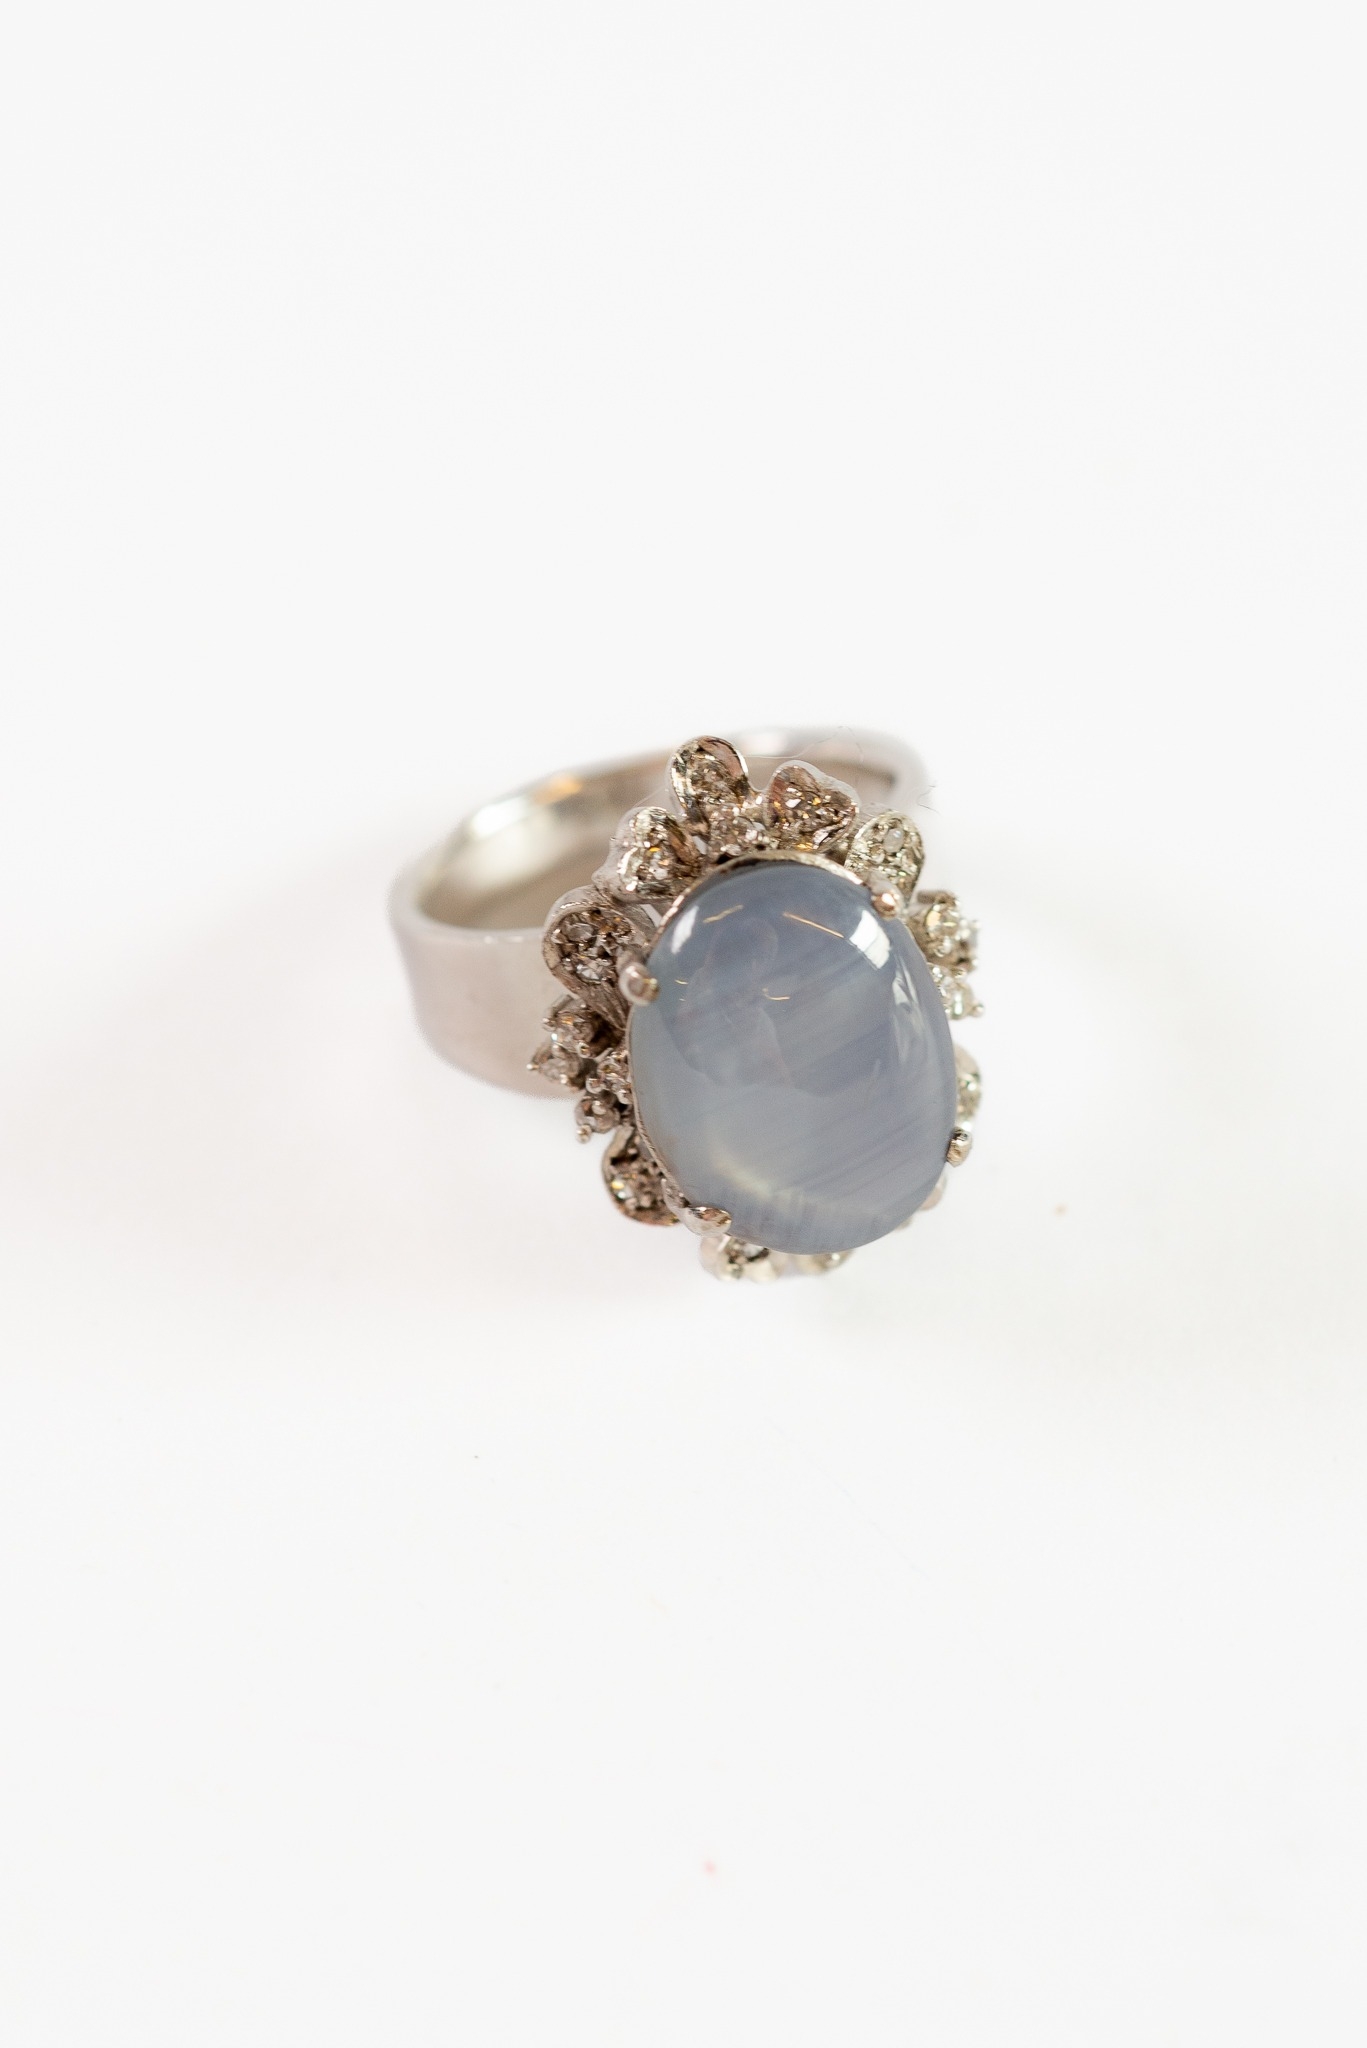 14k WHITE GOLD DRESS RING SET WITH A CABOCHON STAR SAPPHIRE SHOWING 'SIX RAY ASTERISM' within